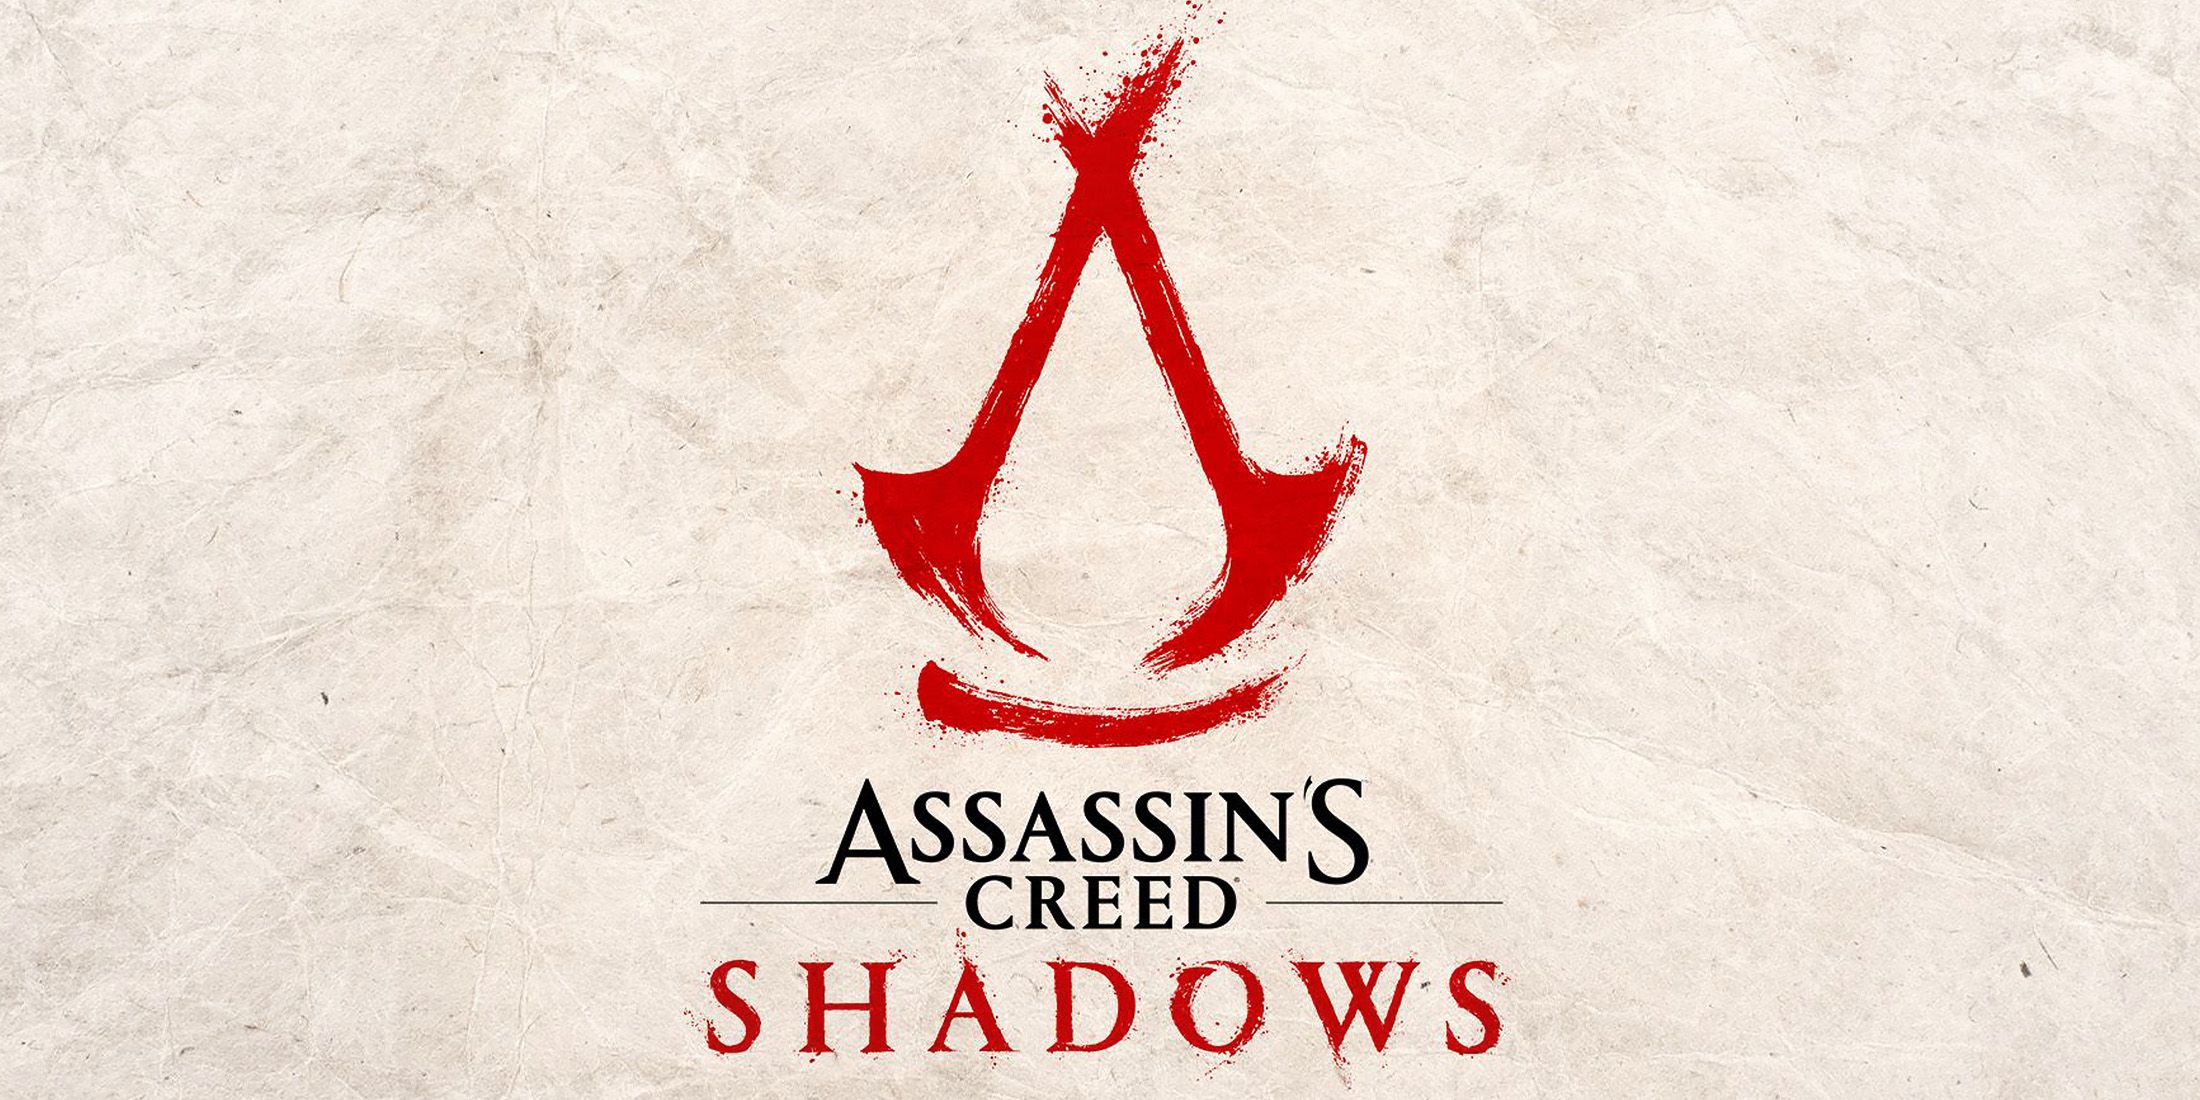 Assassin's Creed Shadows logo on parchment